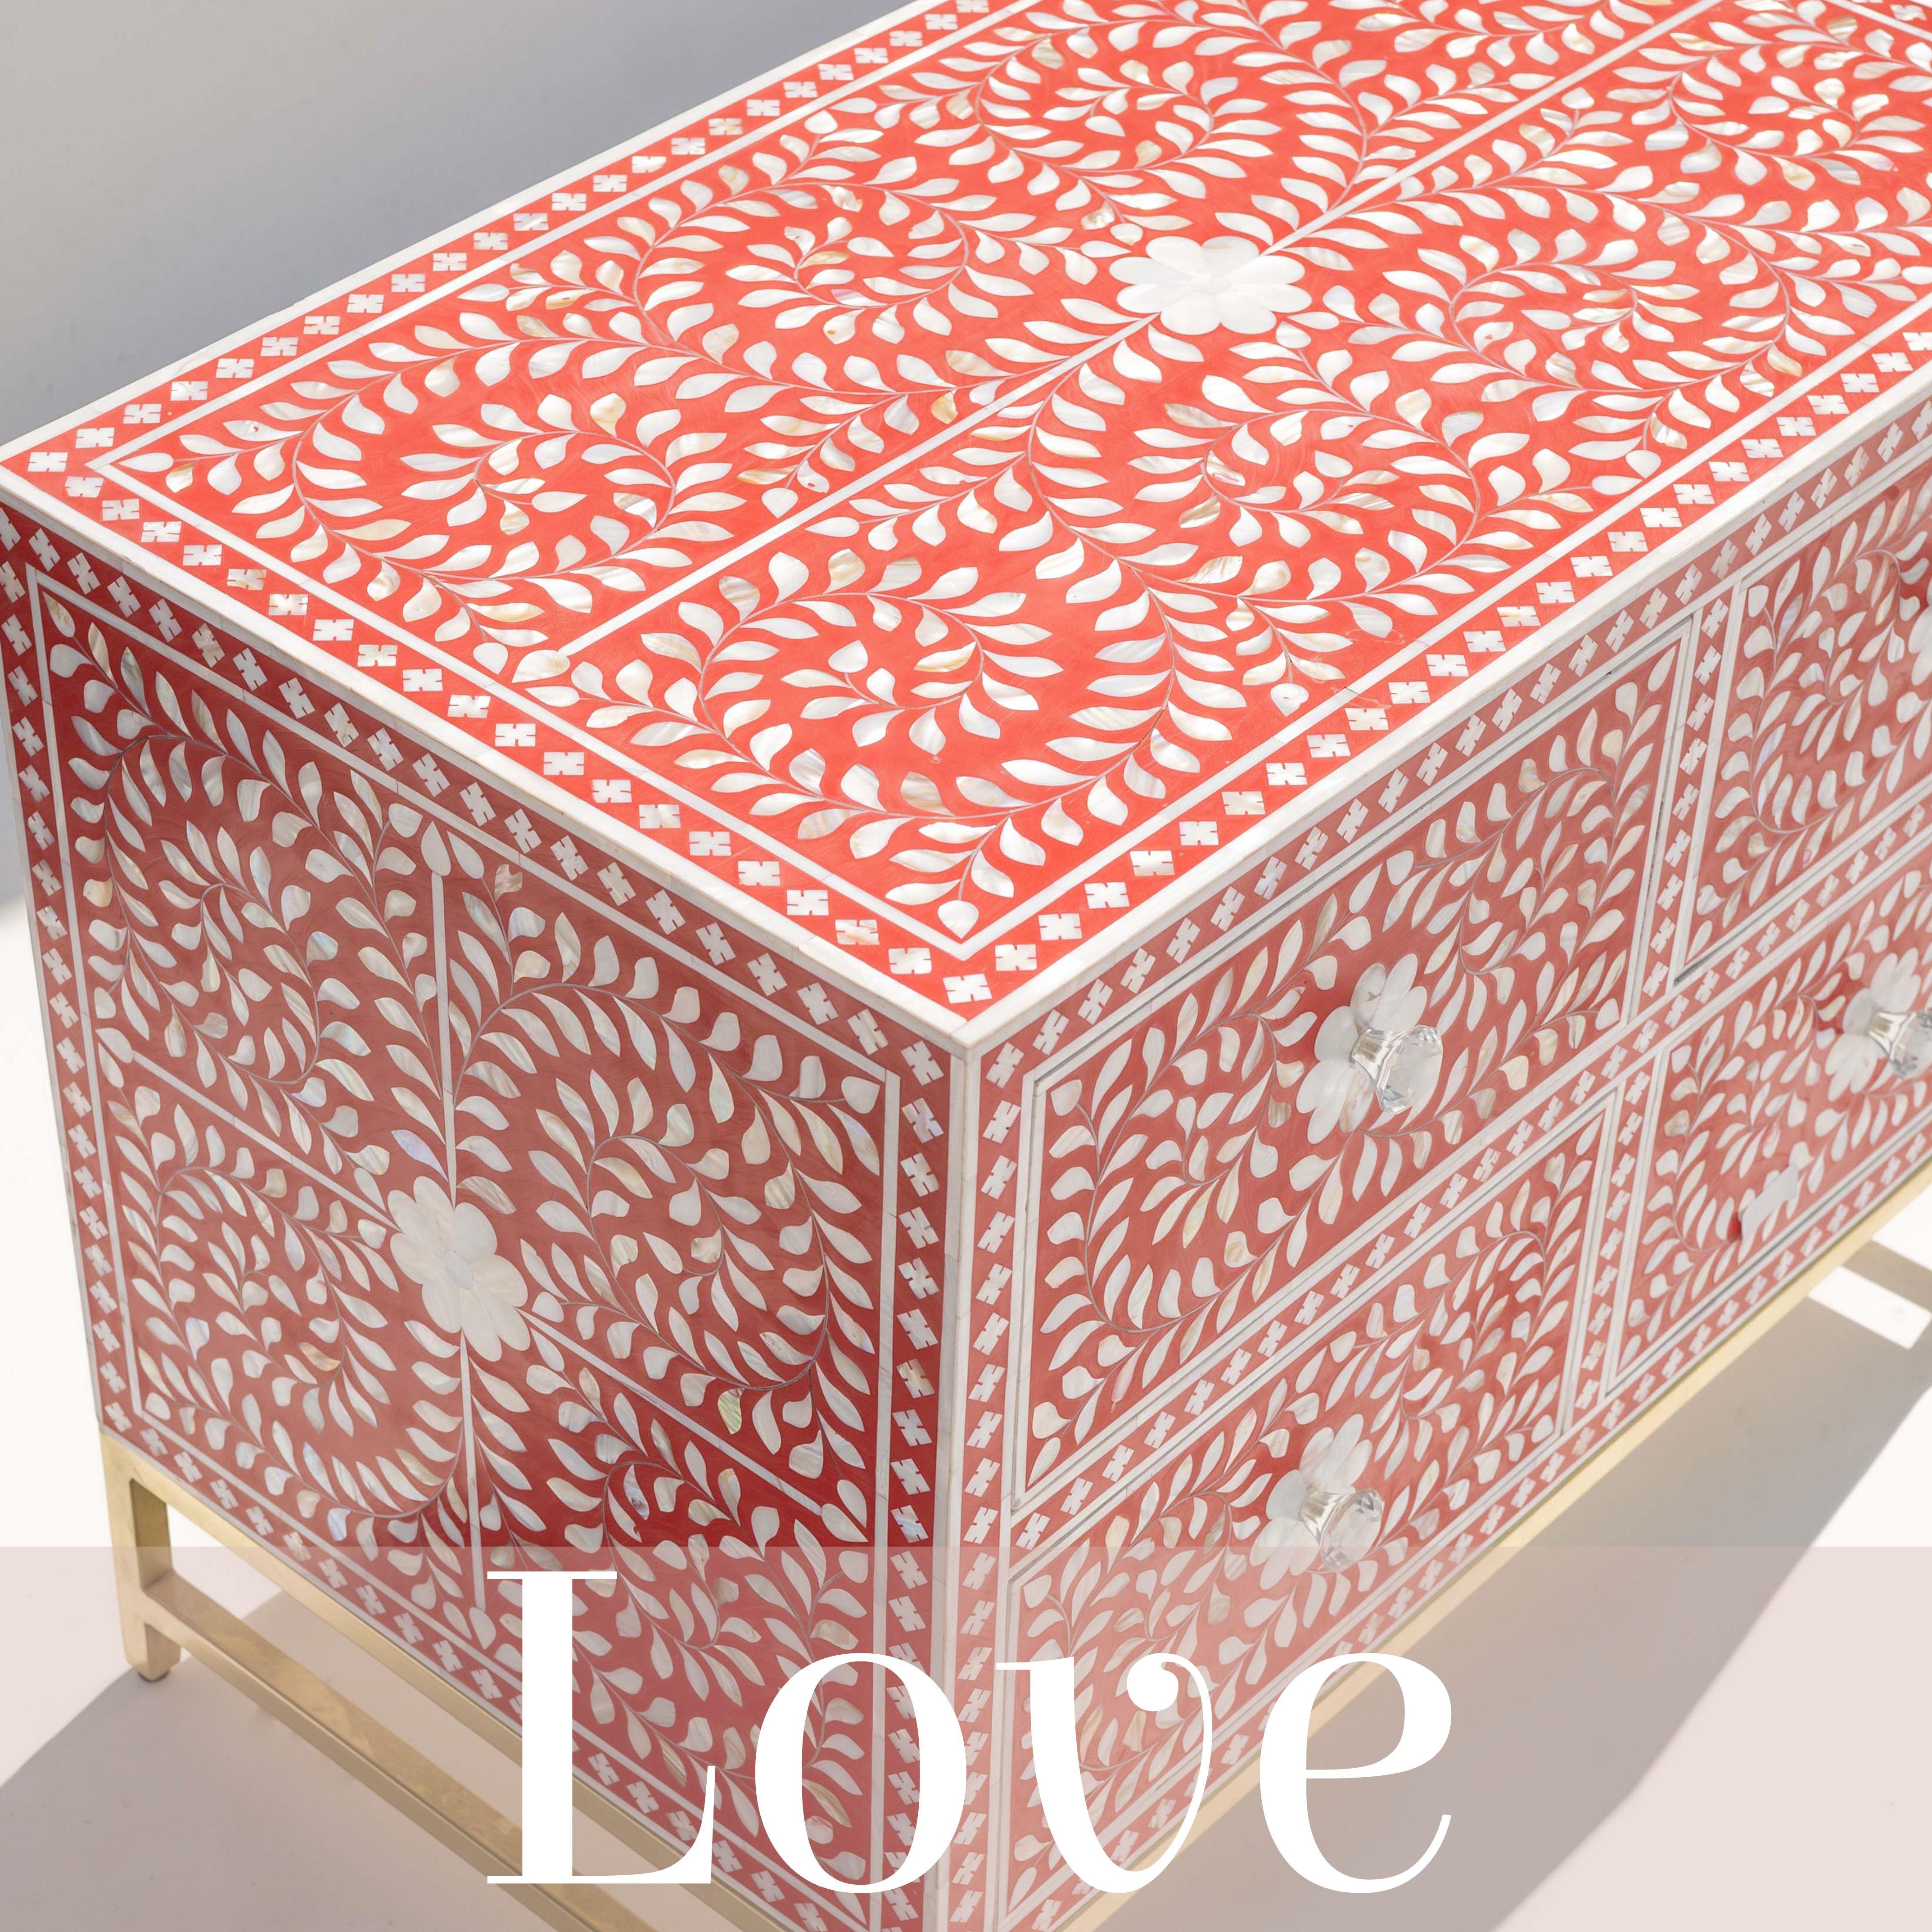 Introducing our exquisite Mother of Pearl Inlay Dresser, an undeniable statement piece for any bedroom or living room. This stunning four drawer dresser is entirely handmade, featuring intricate mother of pearl inlay flower and spiral leaf patterns